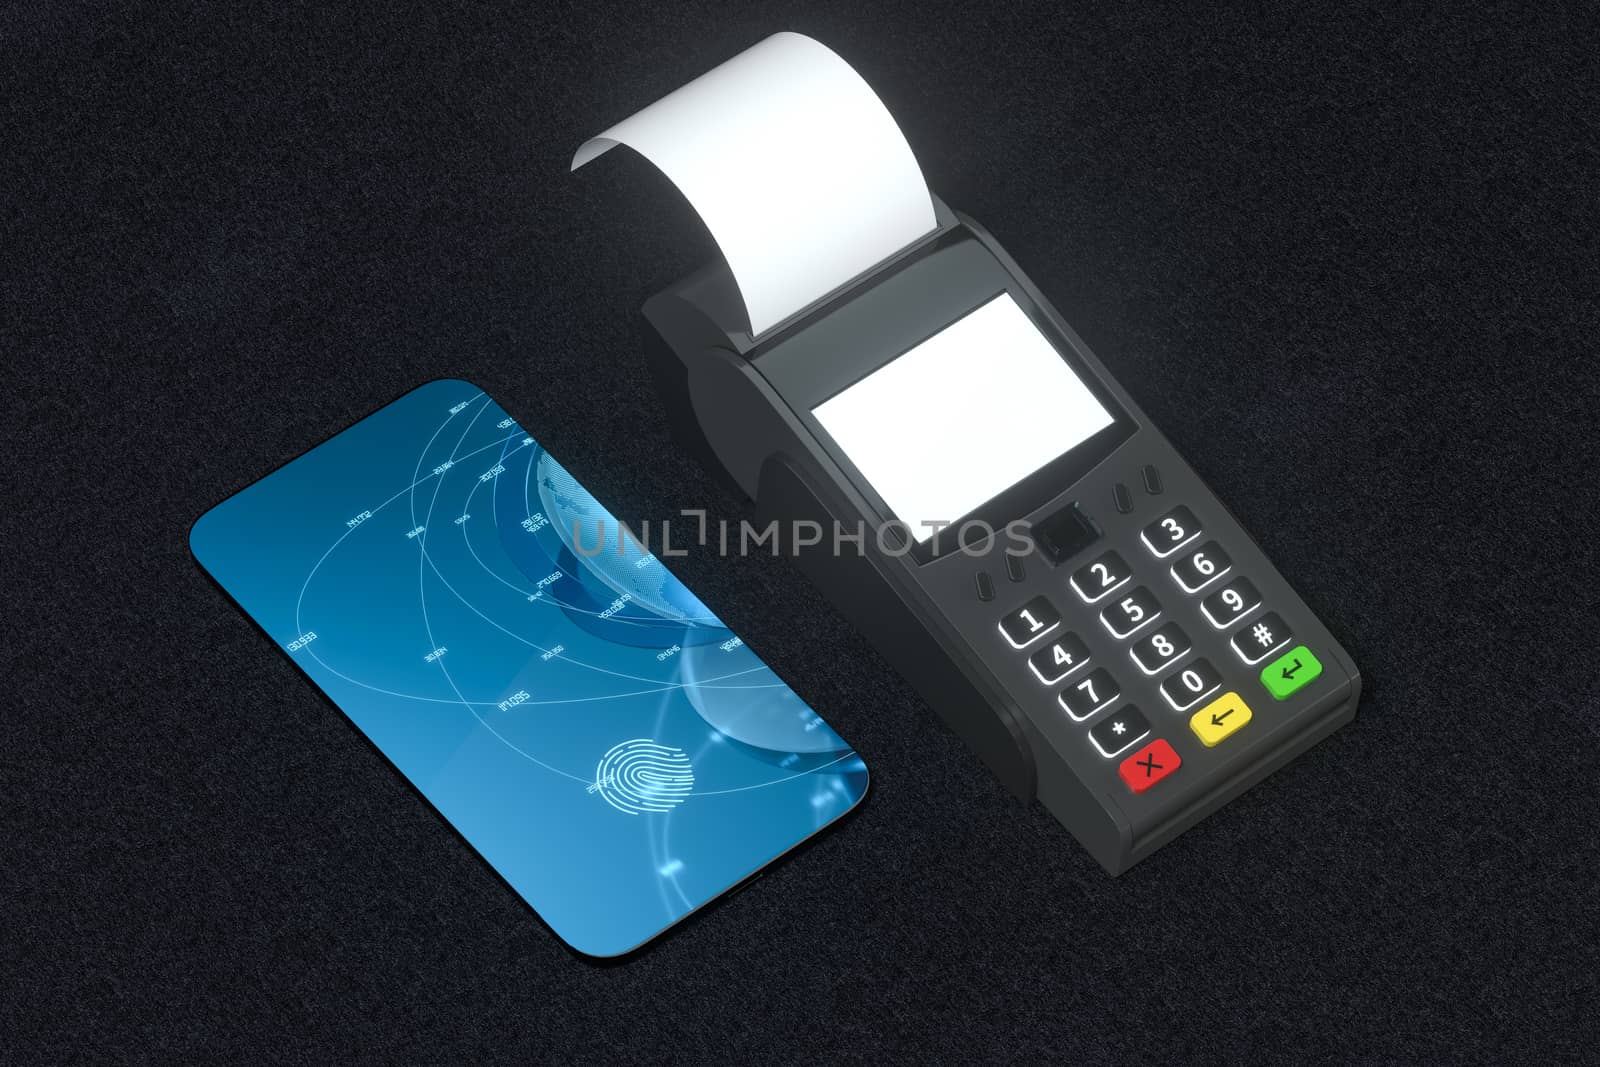 POS machine and mobile phone with fingerprint identification, 3d rendering. by vinkfan